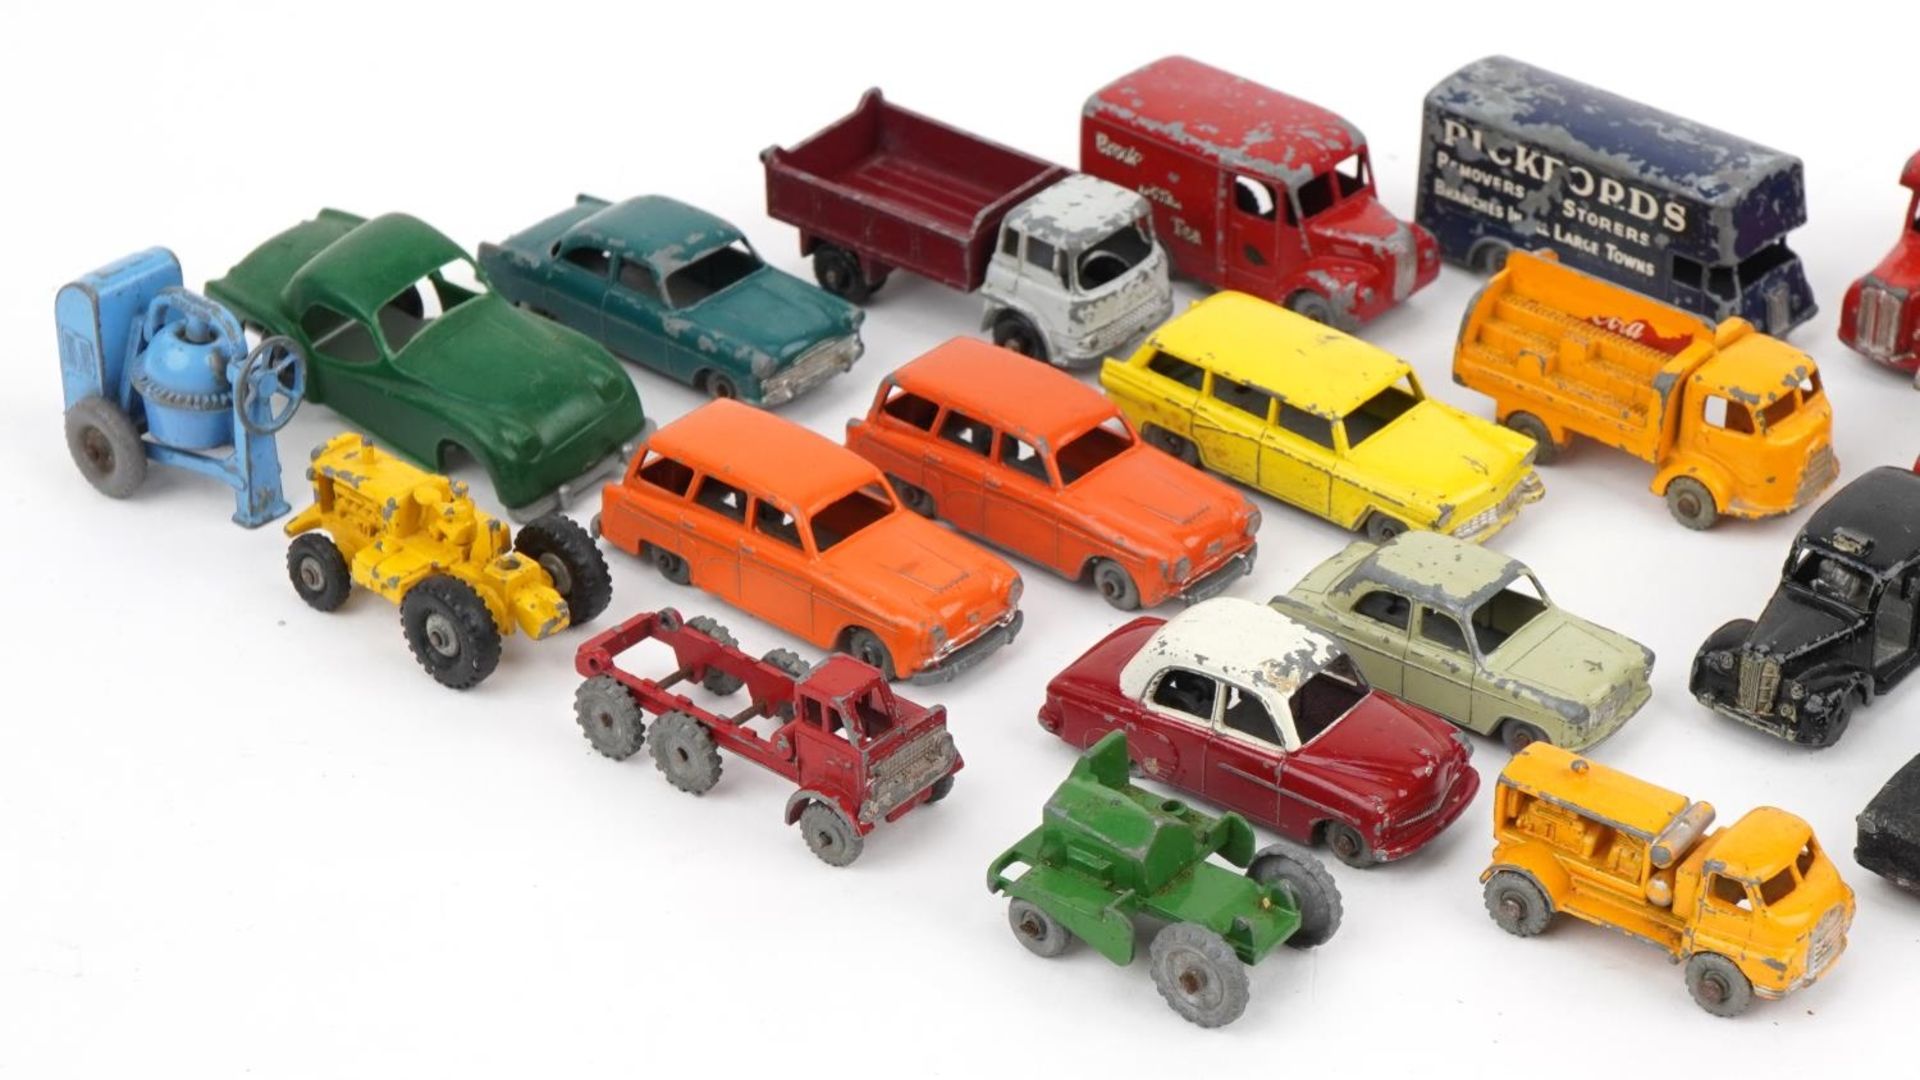 Vintage diecast vehicles including Lesney, Bedford 7.5 ton tipper, Pickford removal van and Marshall - Image 2 of 3